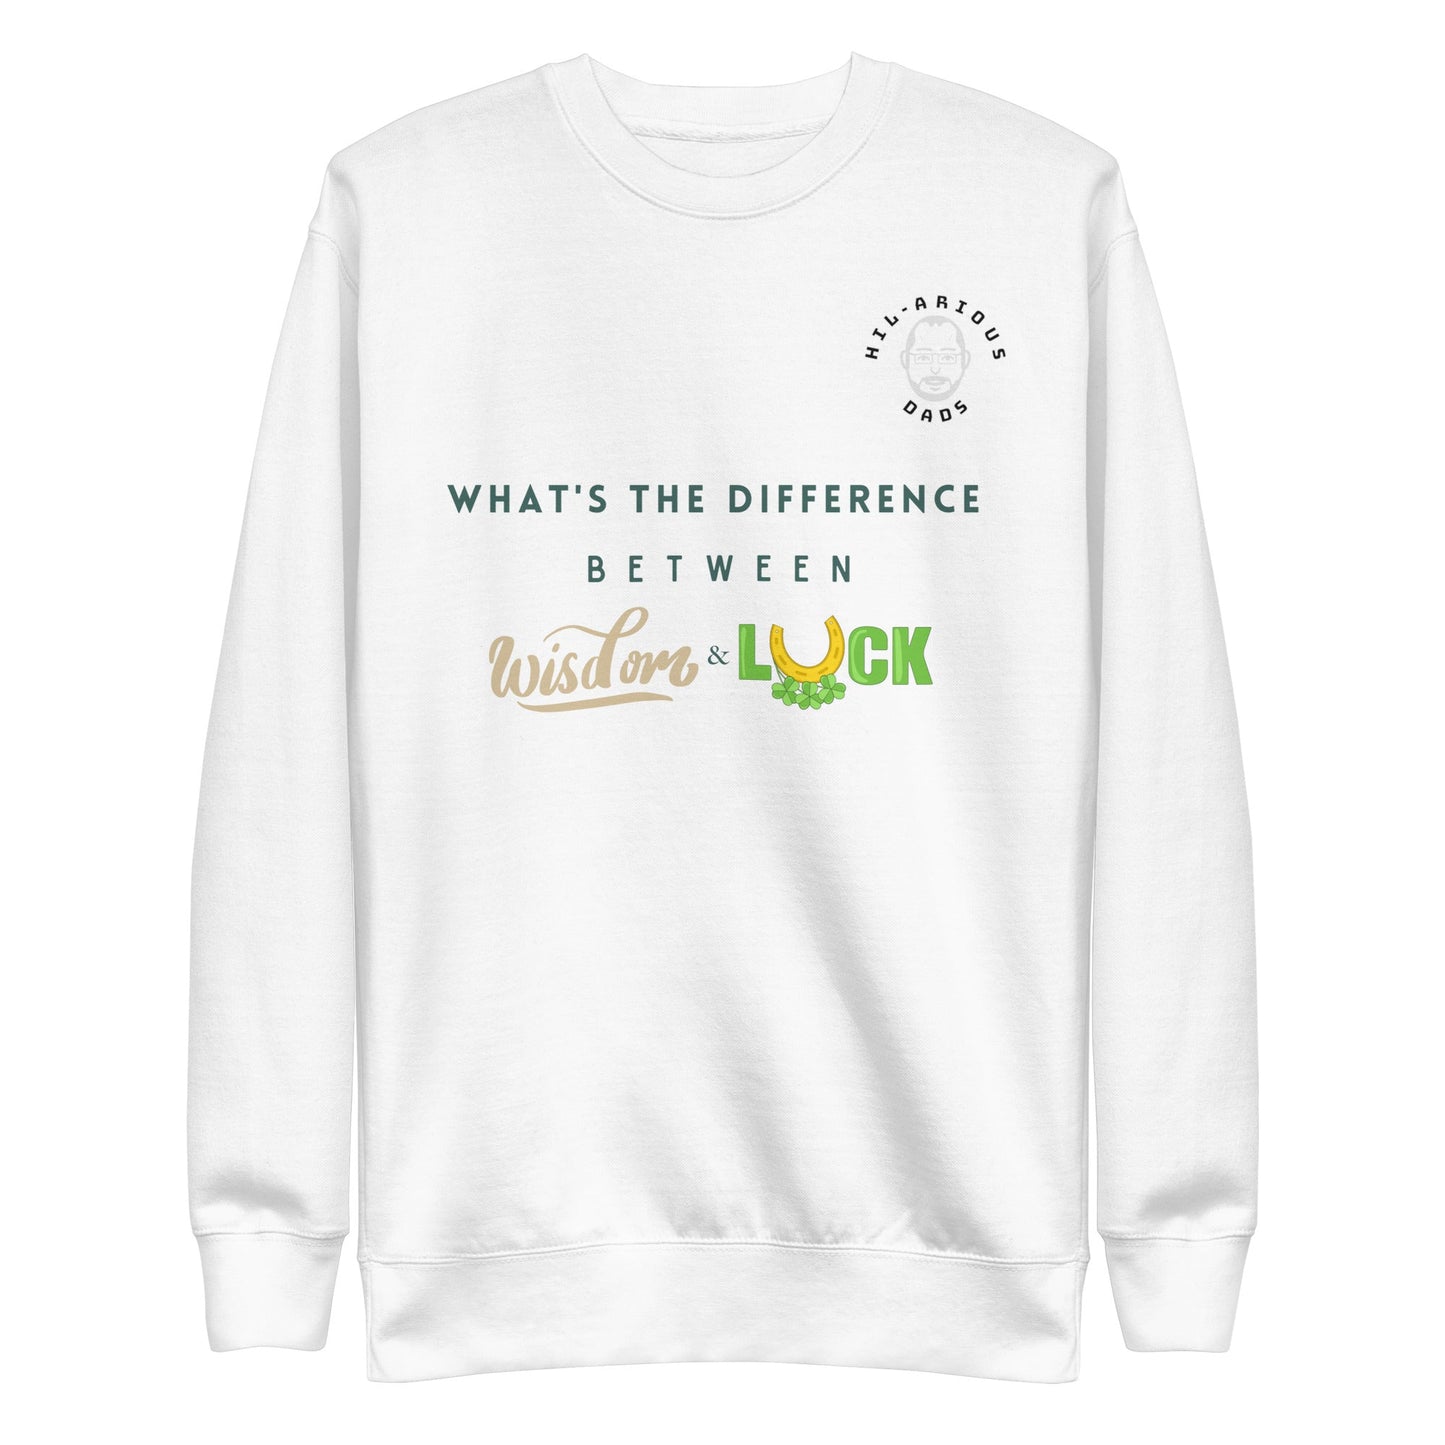 What's the difference between wisdom and luck?-Sweatshirt - Hil-arious Dads